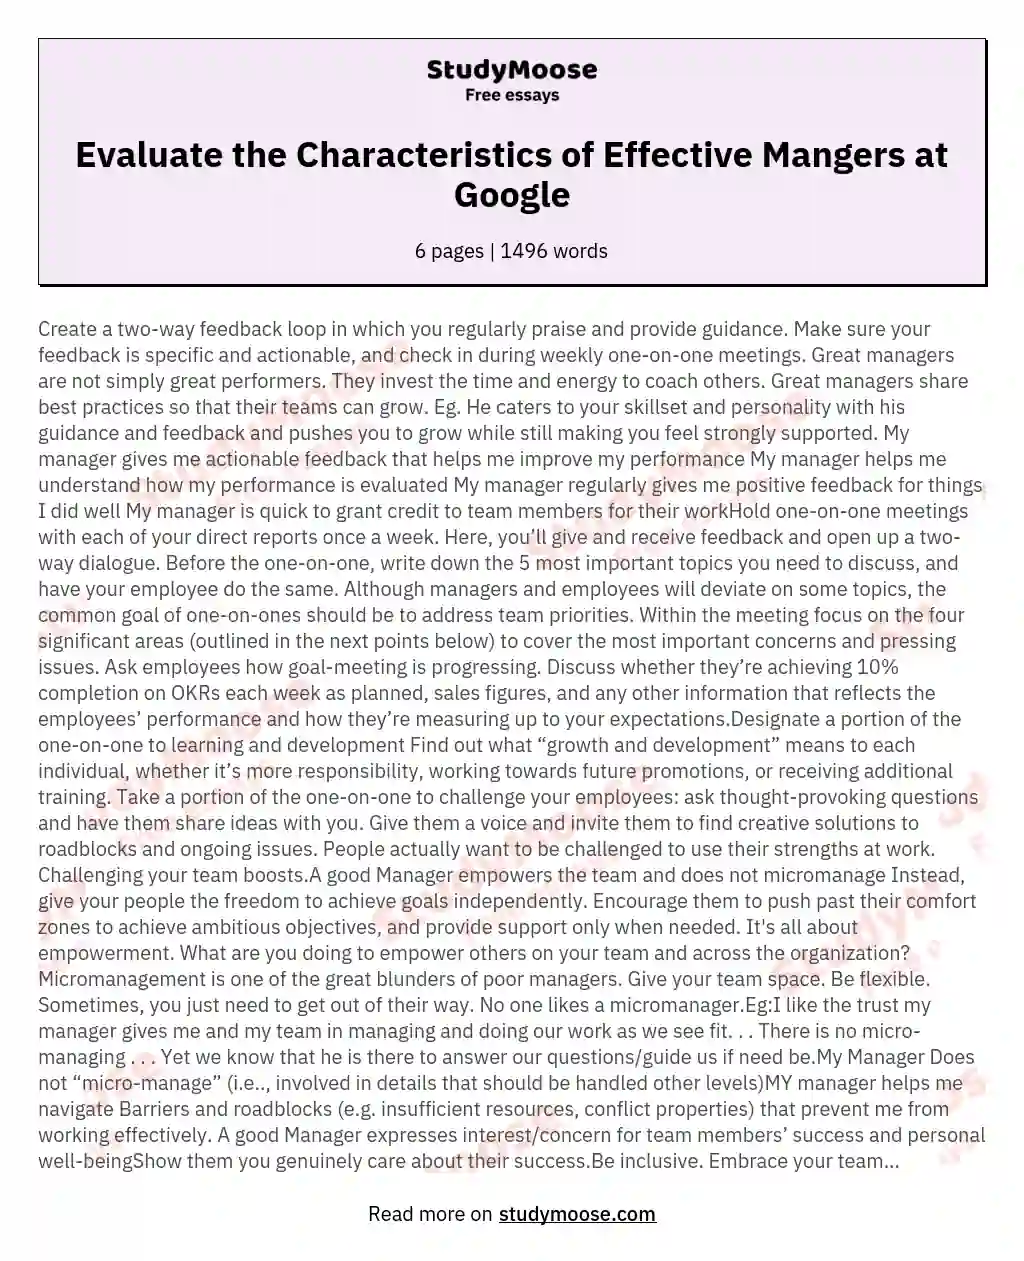 Evaluate the Characteristics of Effective Mangers at Google essay